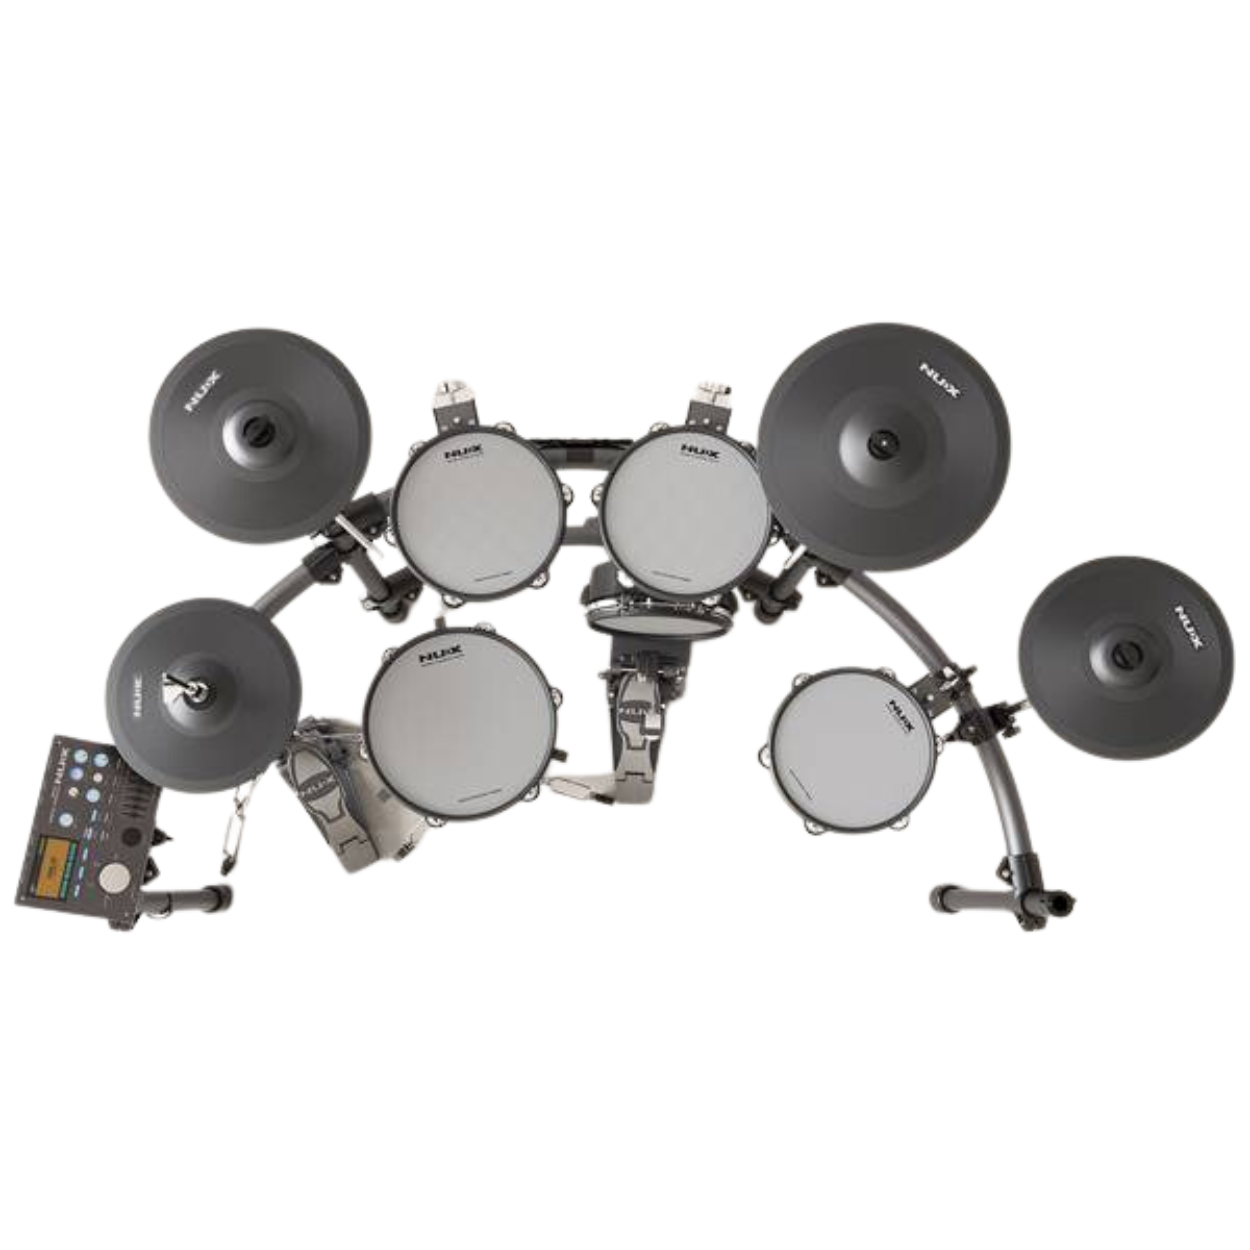 NUX DM-8 5-Piece Professional Digital Electronic Drum Set with Mesh Head and DA-30BT Monitor Speaker | Zoso Music Sdn Bhd